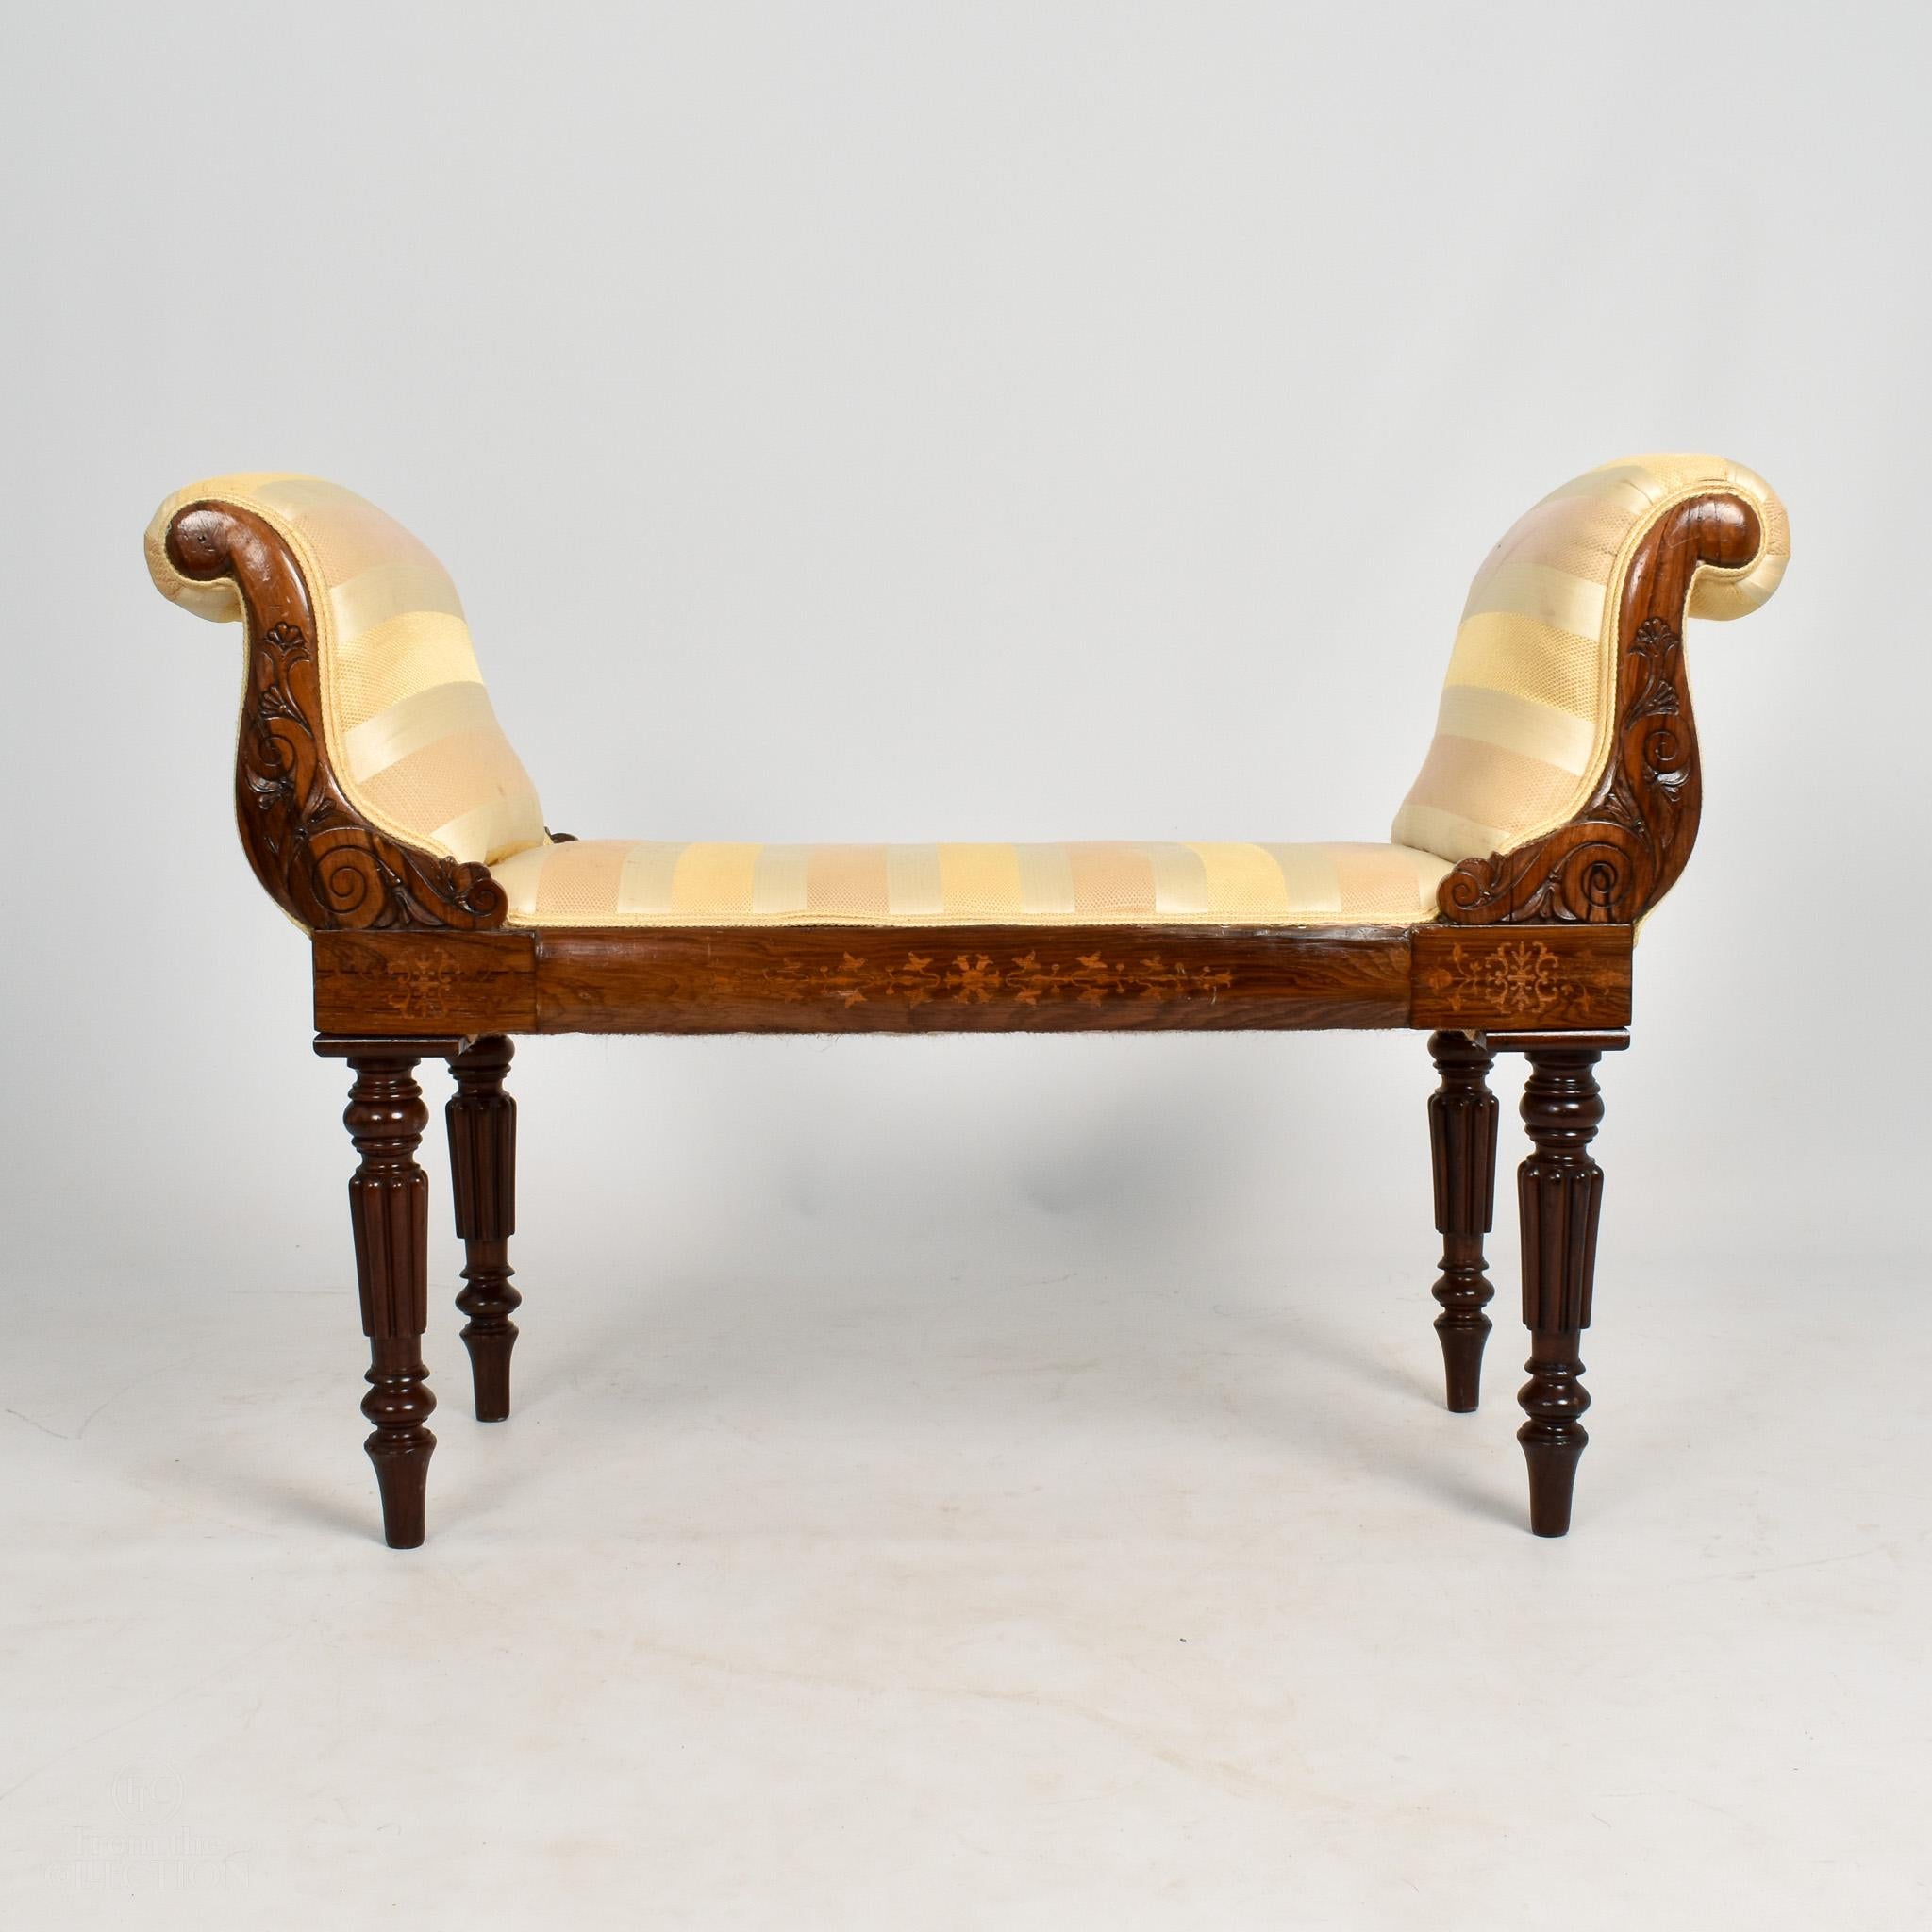 A Gillows Mahogany Window Seat circa 1840. With delicately carved detail above the turned legs and scroll ended arms. In excellent condition and beautiful colour. A rare example of Gillows furniture. 